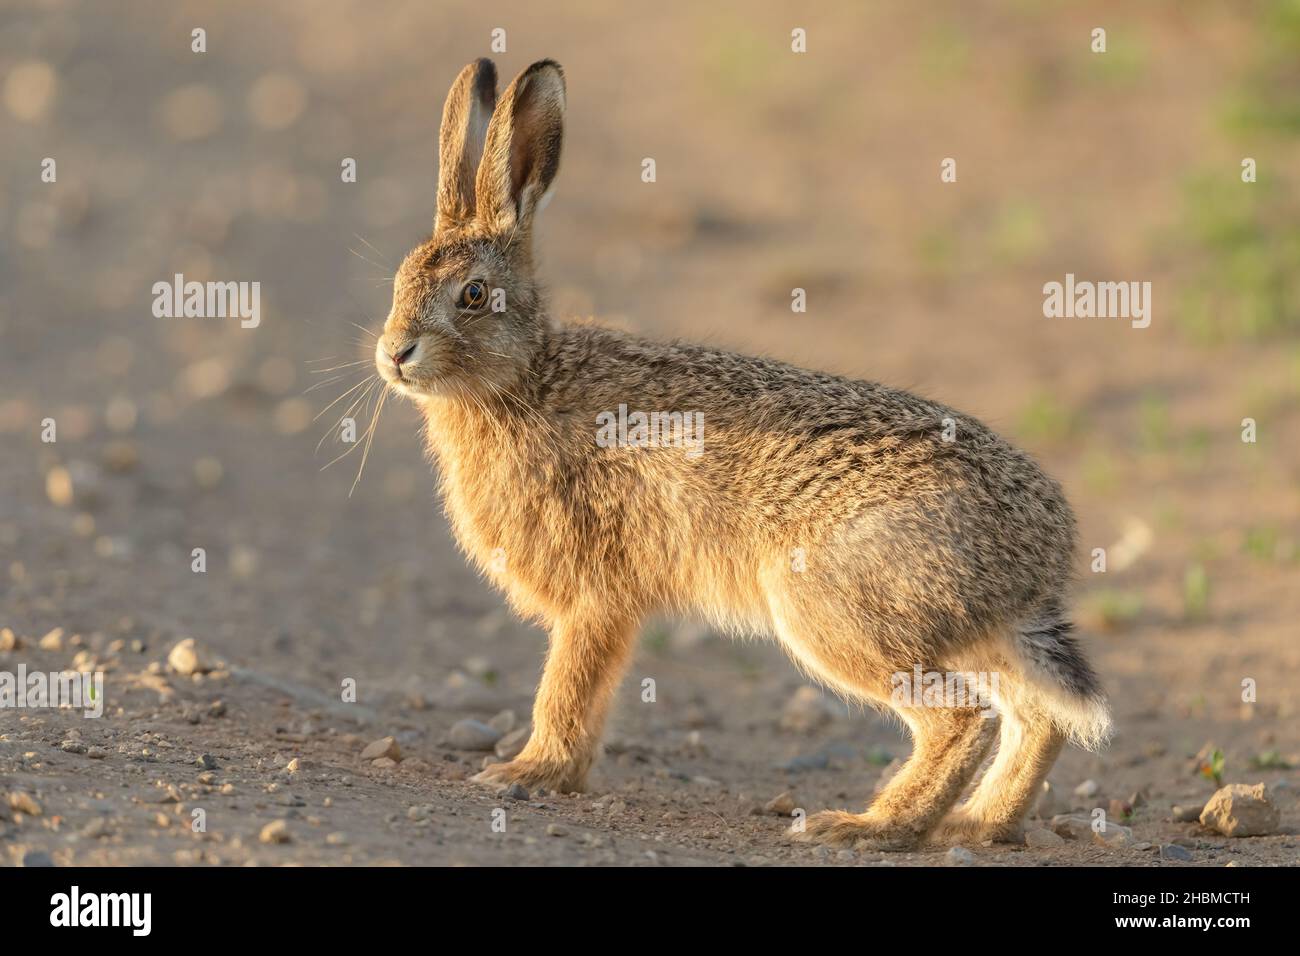 Close up of a young hare or leveret in Springtime.  standing alert on farmland. Facing camera, blurred background.  Scientific name:  Lepus Europaeus. Stock Photo